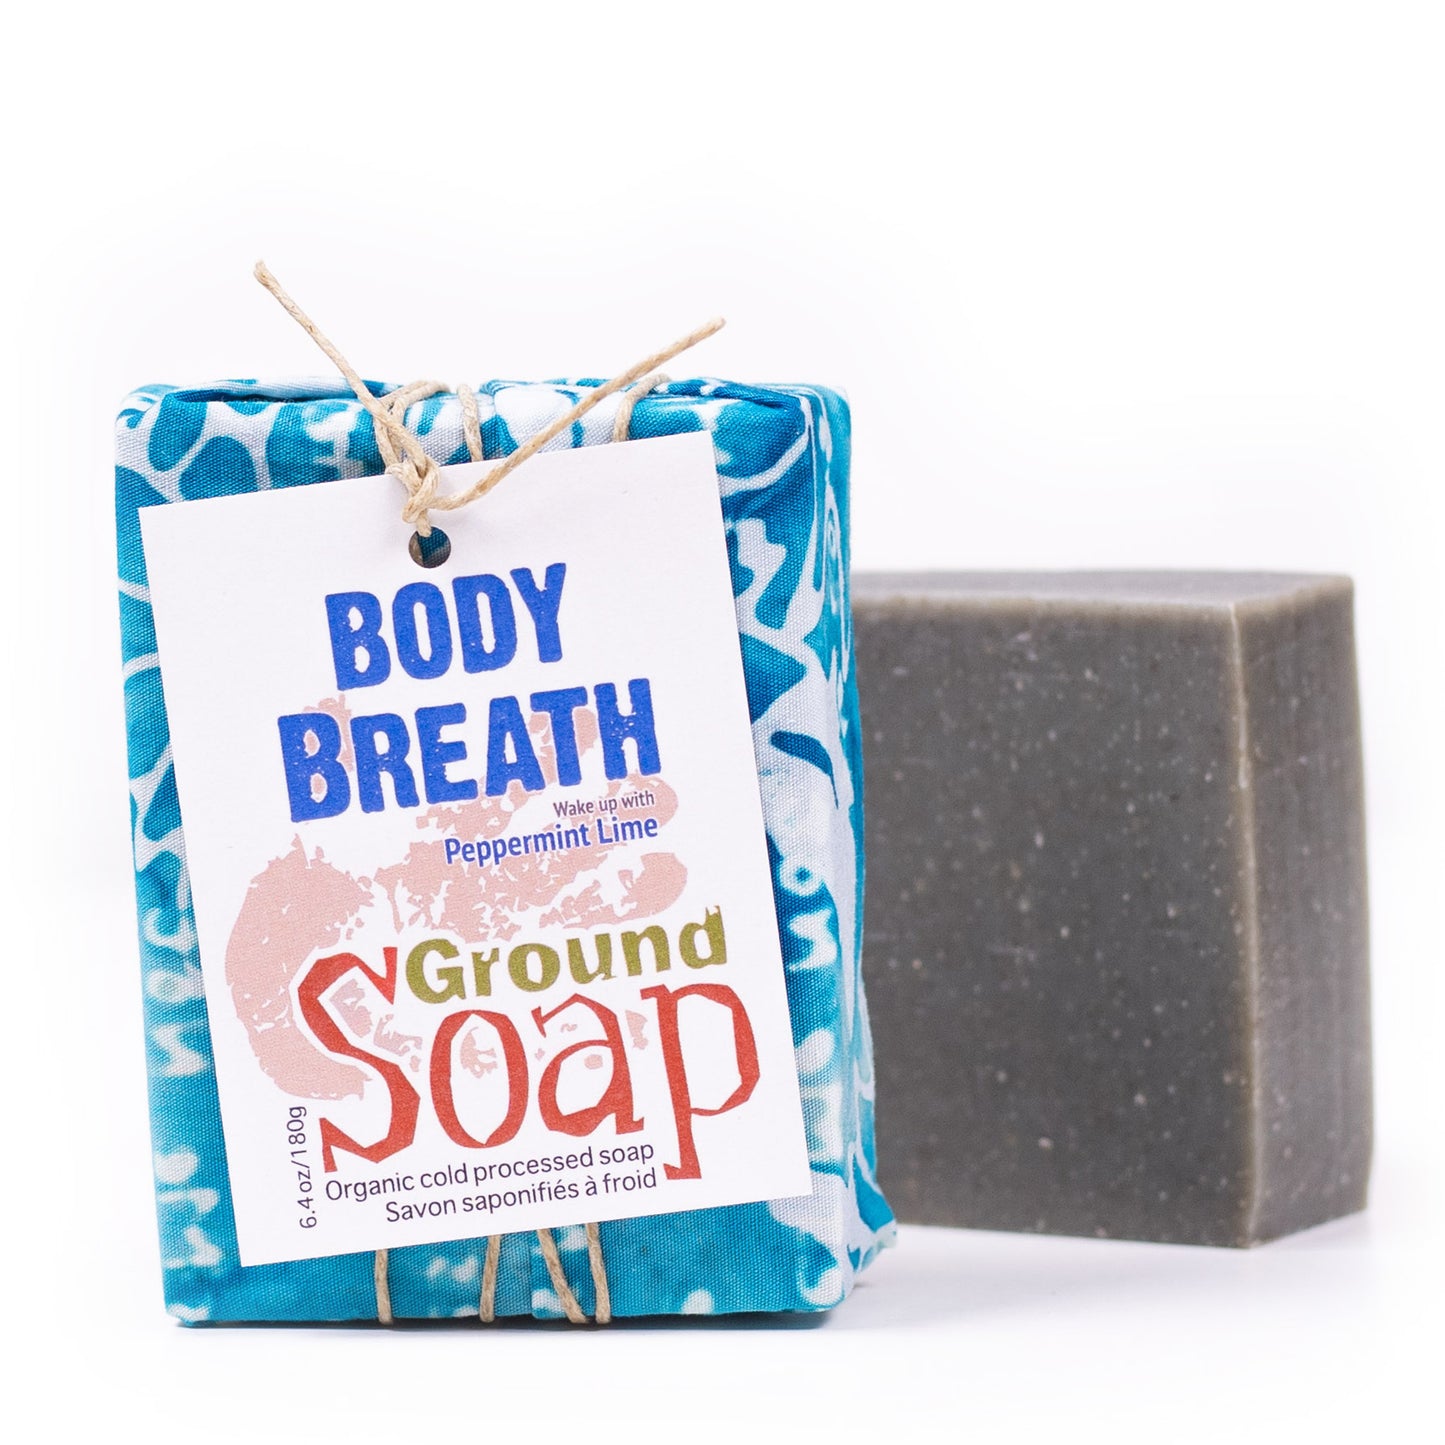 Body Breath Peppermint essential oil organic bar soap from ground Soap. 